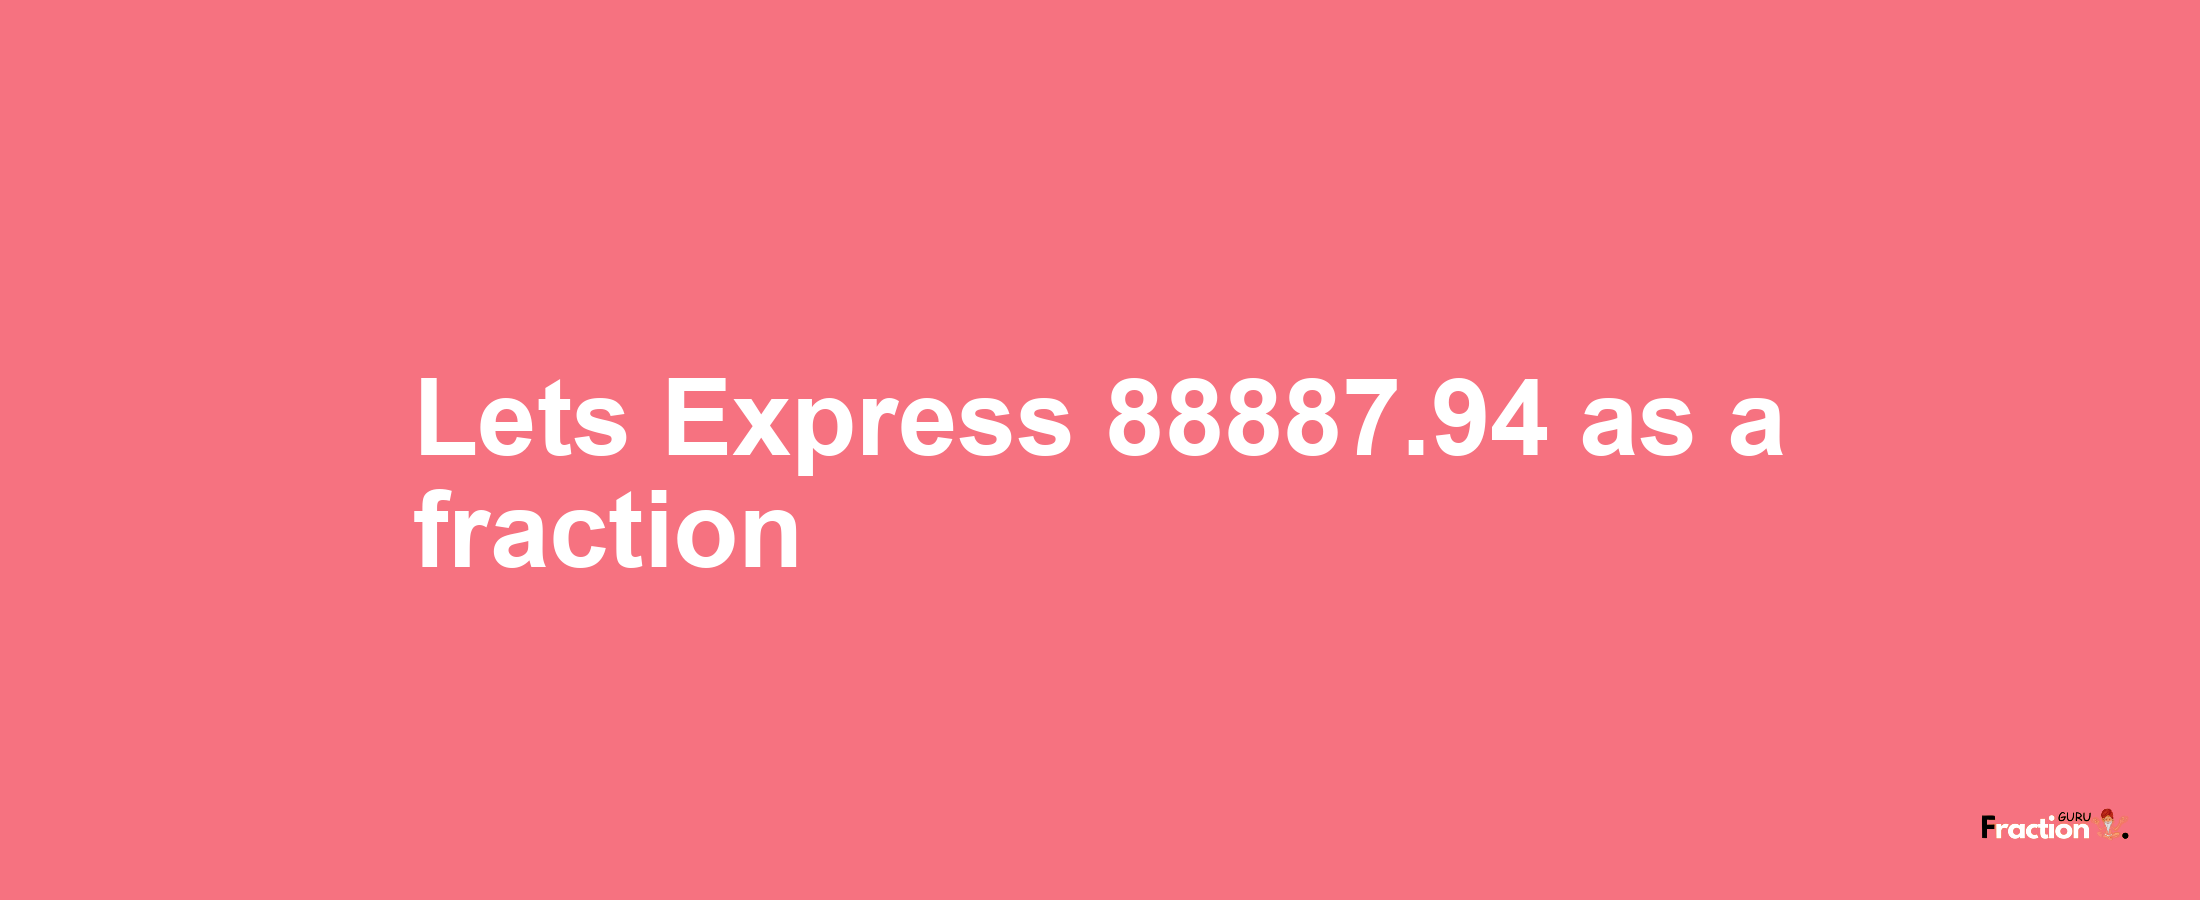 Lets Express 88887.94 as afraction